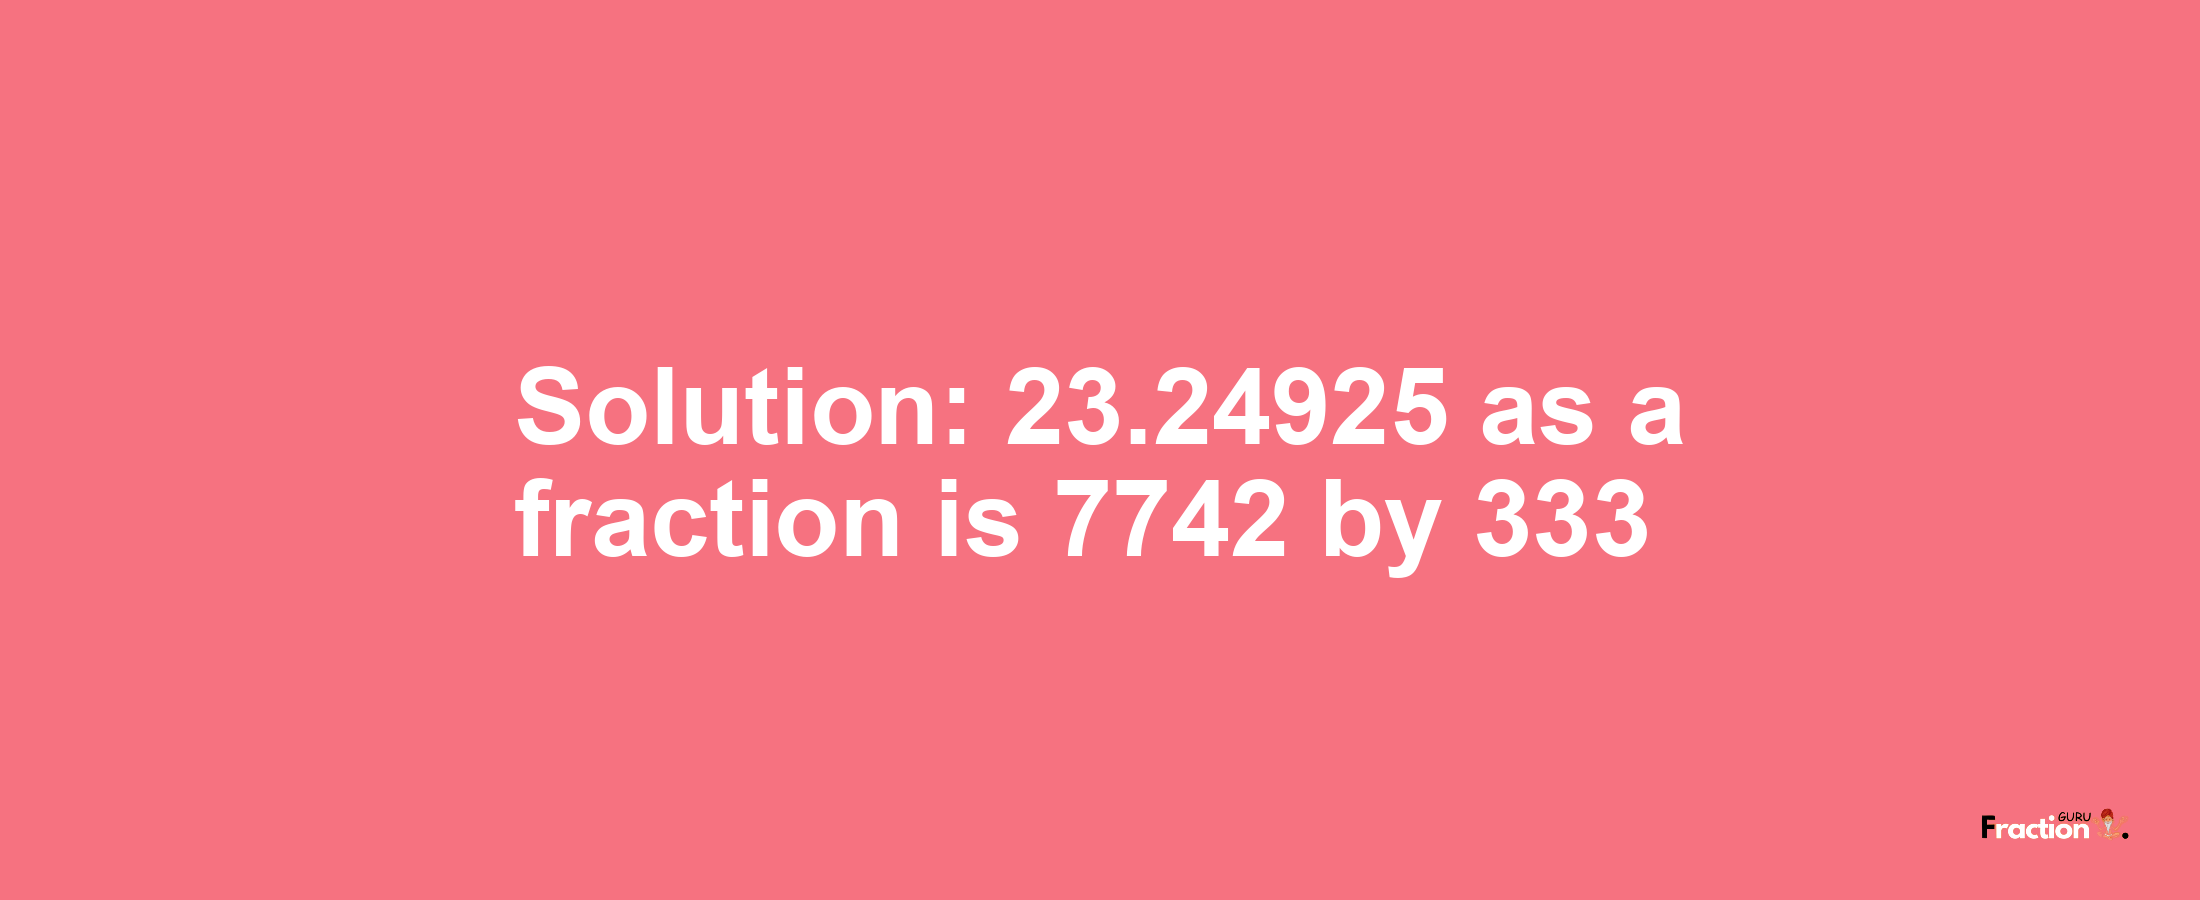 Solution:23.24925 as a fraction is 7742/333